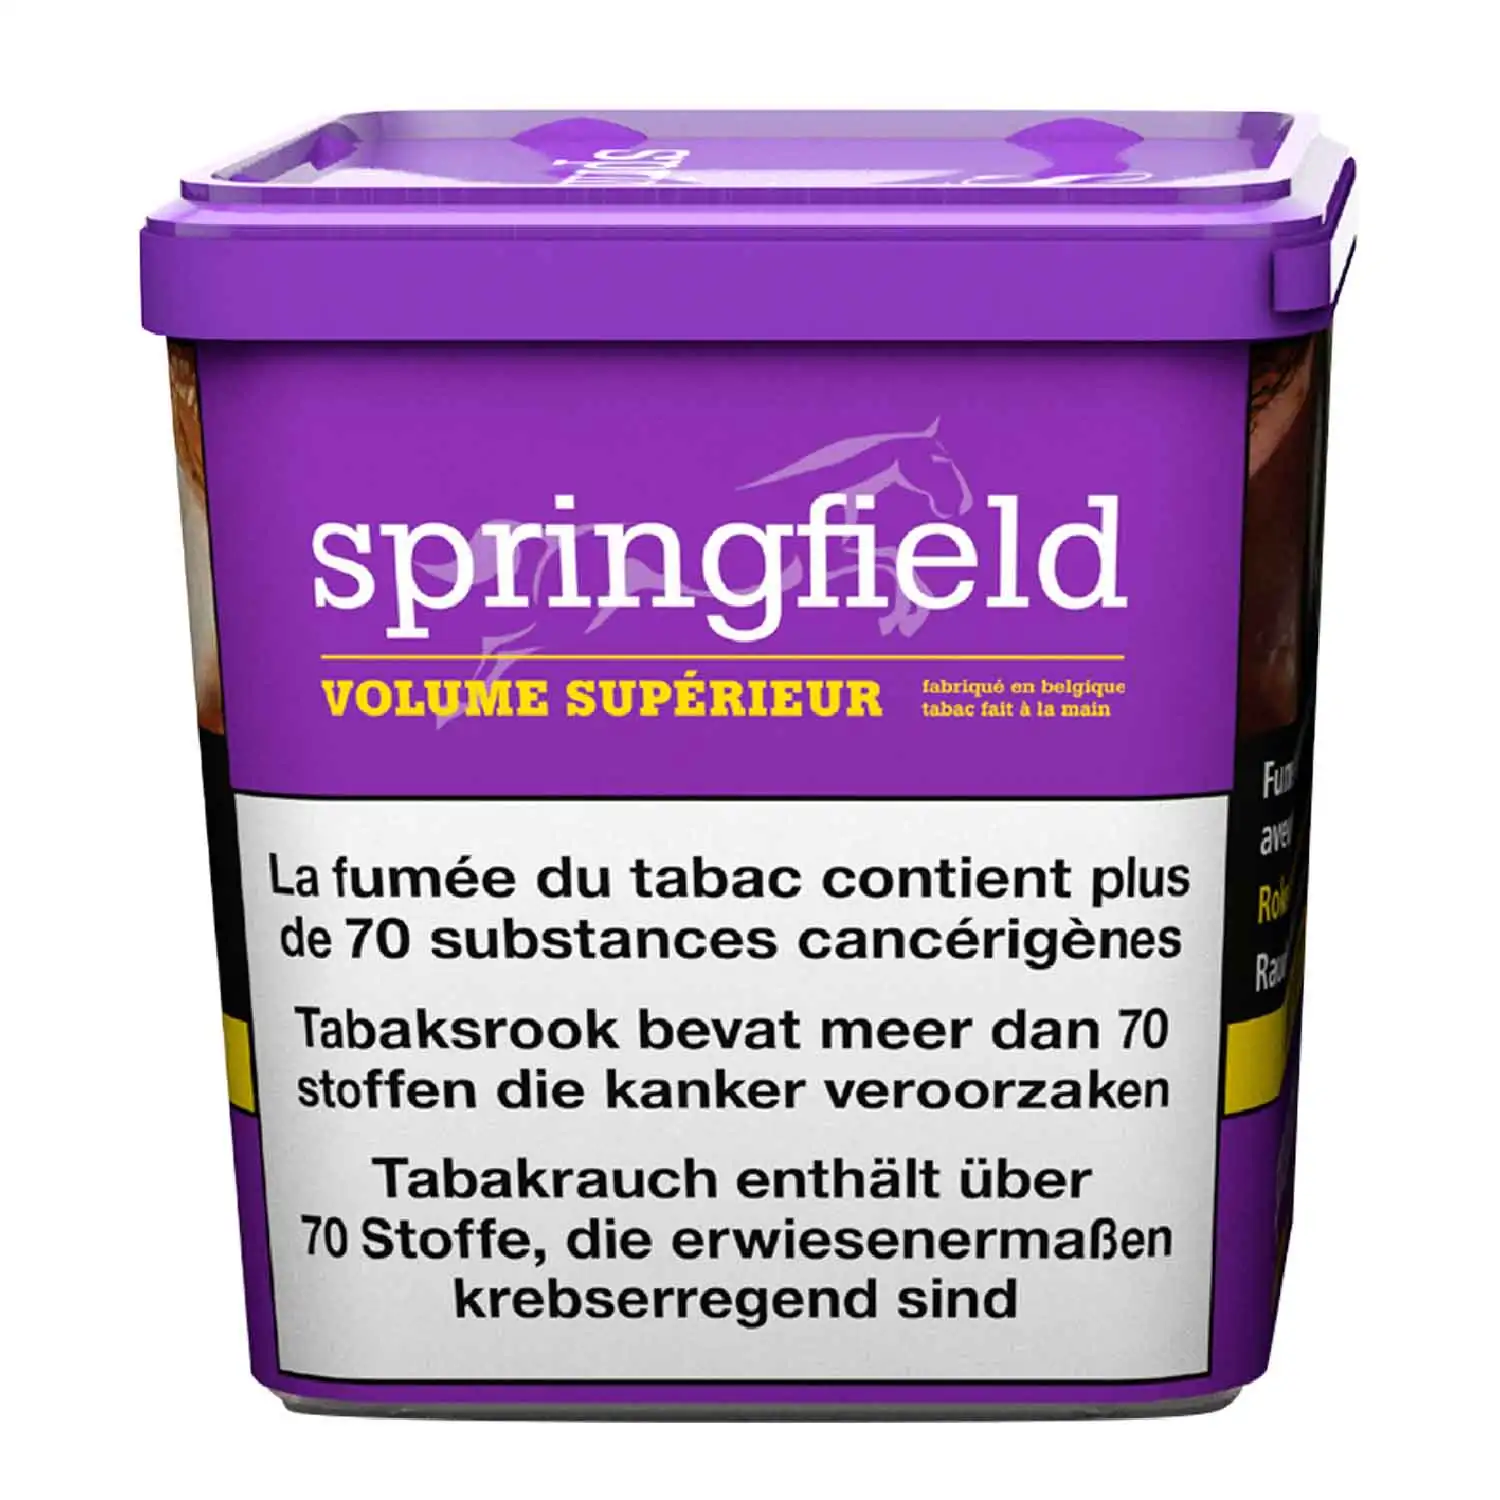 Springfield volume supérieur 250g - Buy at Real Tobacco